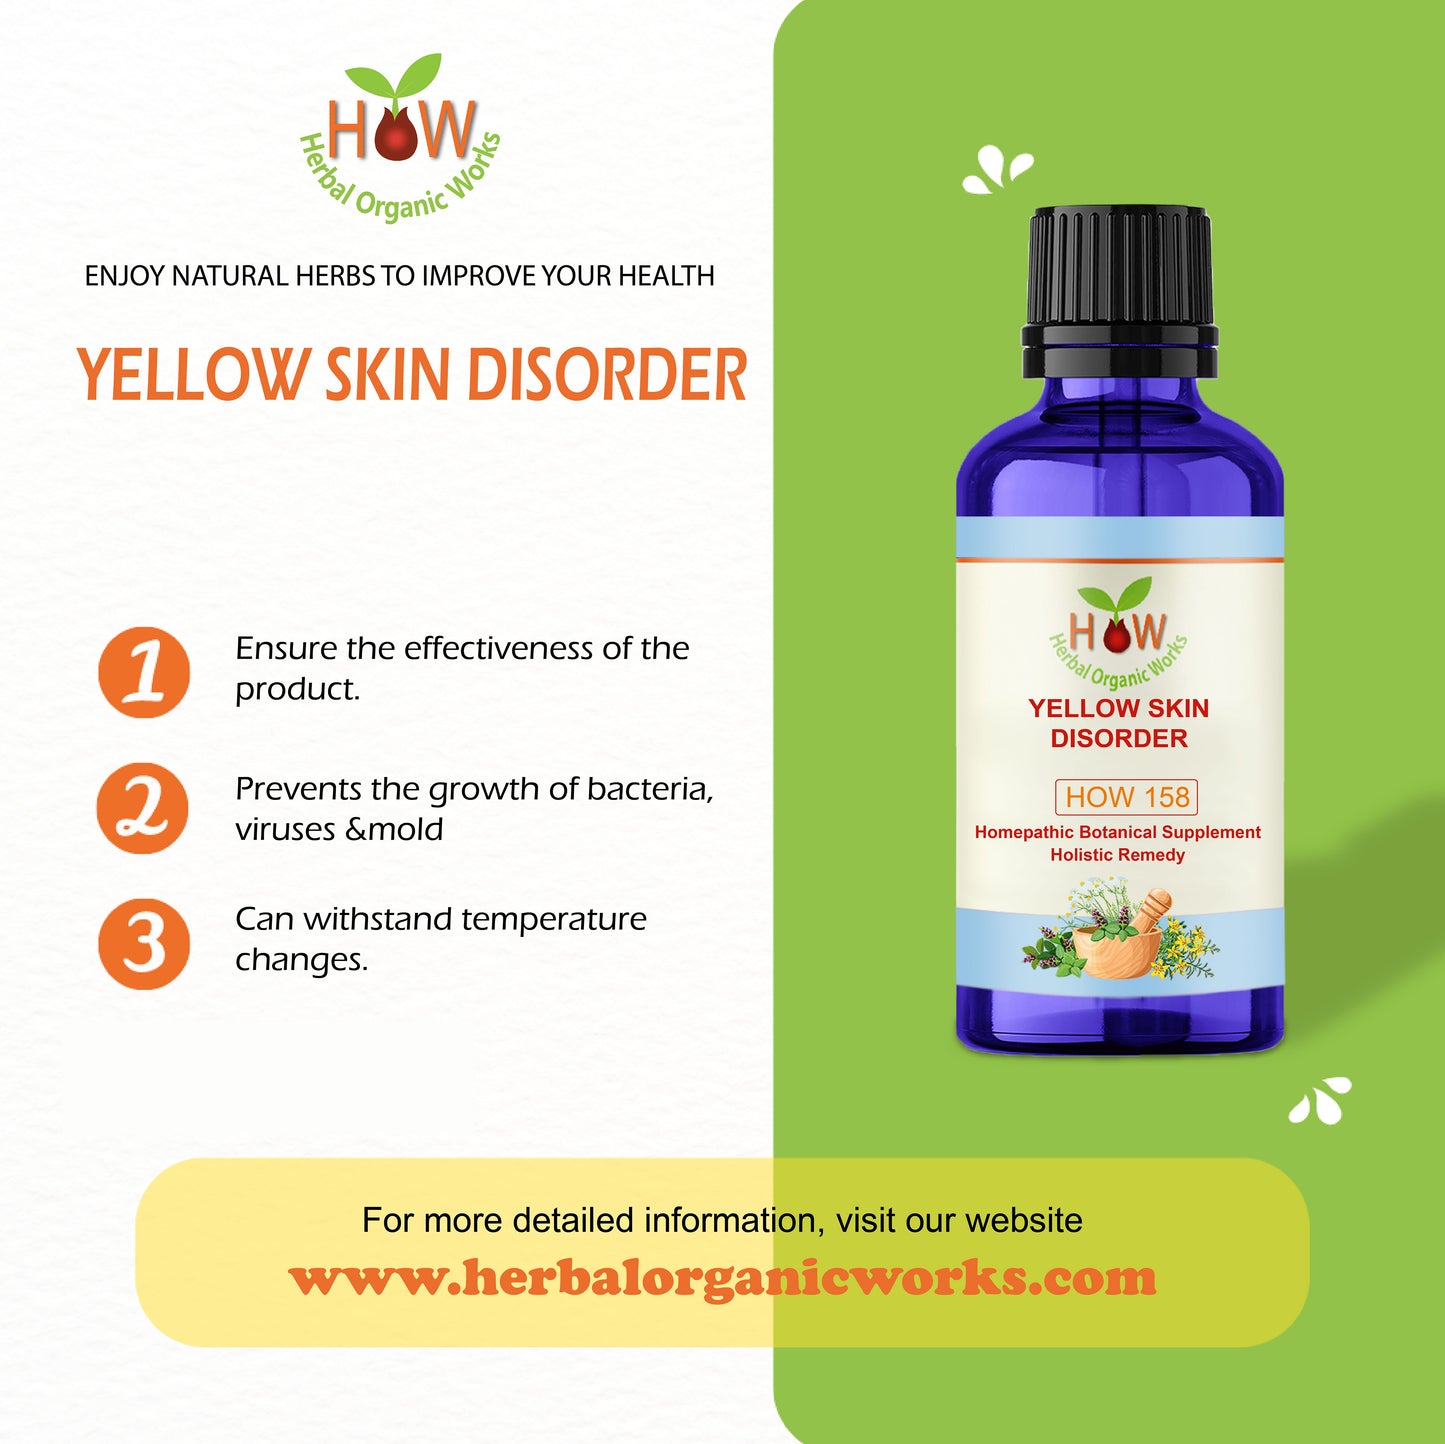 NATURAL REMEDY FOR YELLOW SKIN DISORDER (HOW158)